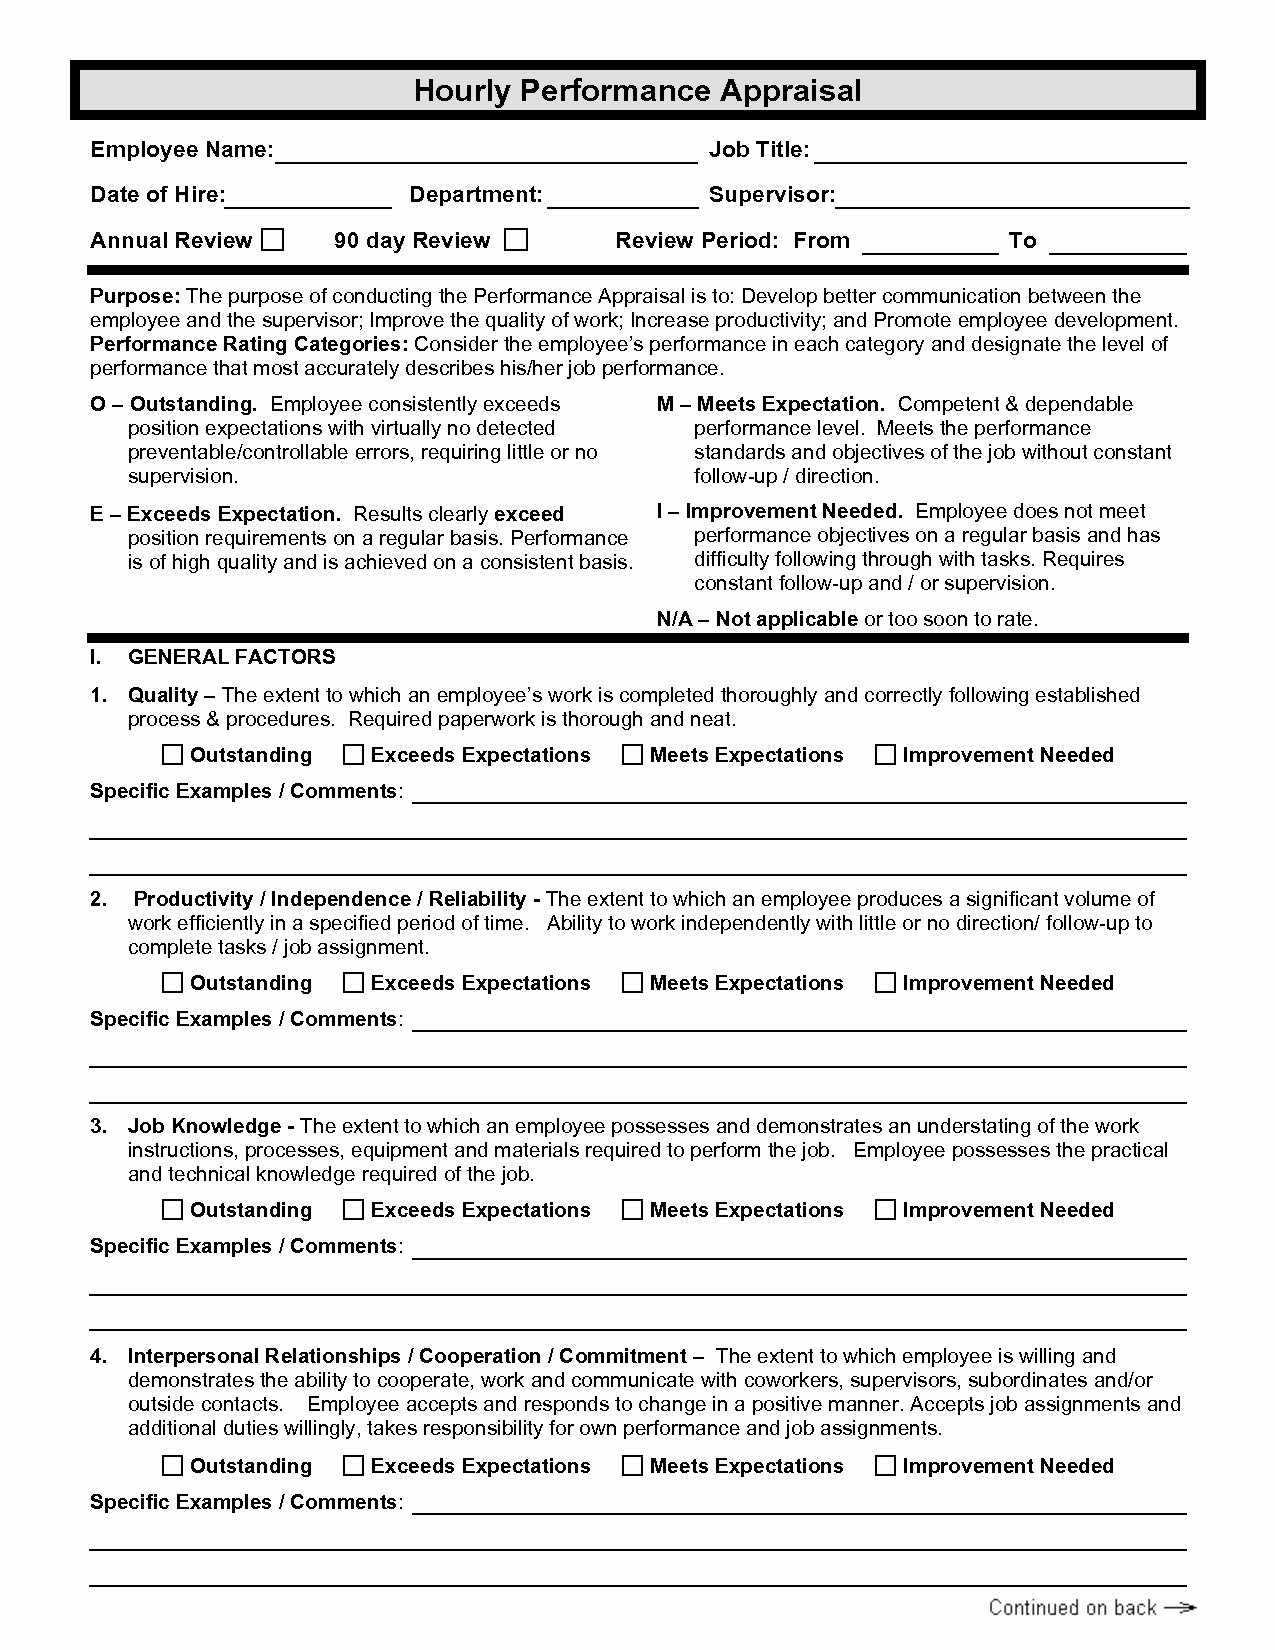 Employee Performance Appraisal form Template Unique Employee Performance Evaluation form Free Download